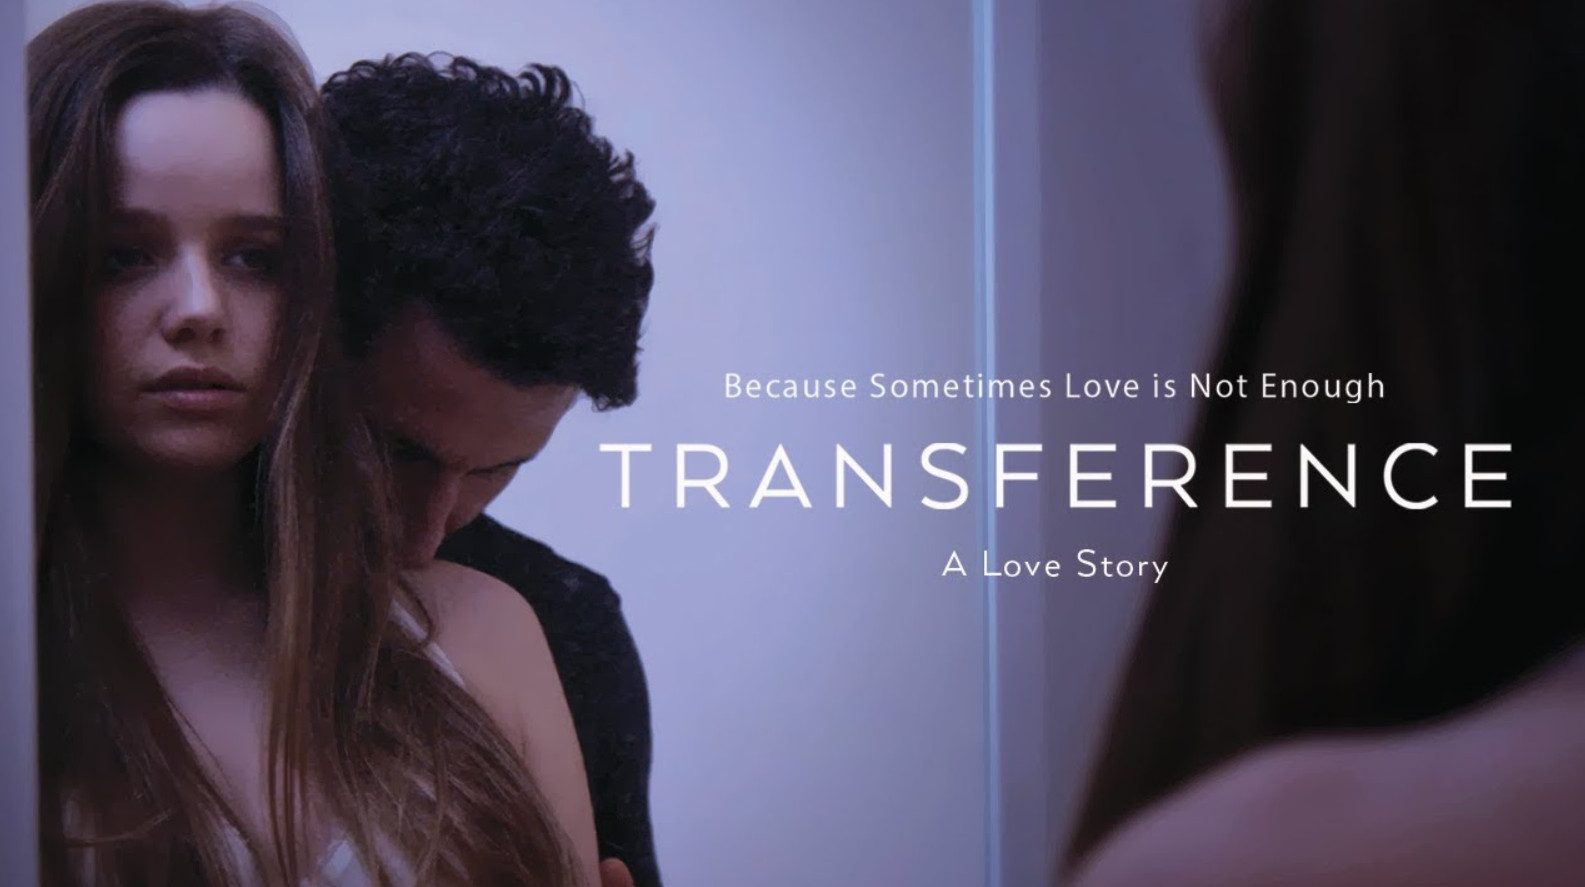 Micro budget indie film transference goes viral on youtube hitting 13 million views